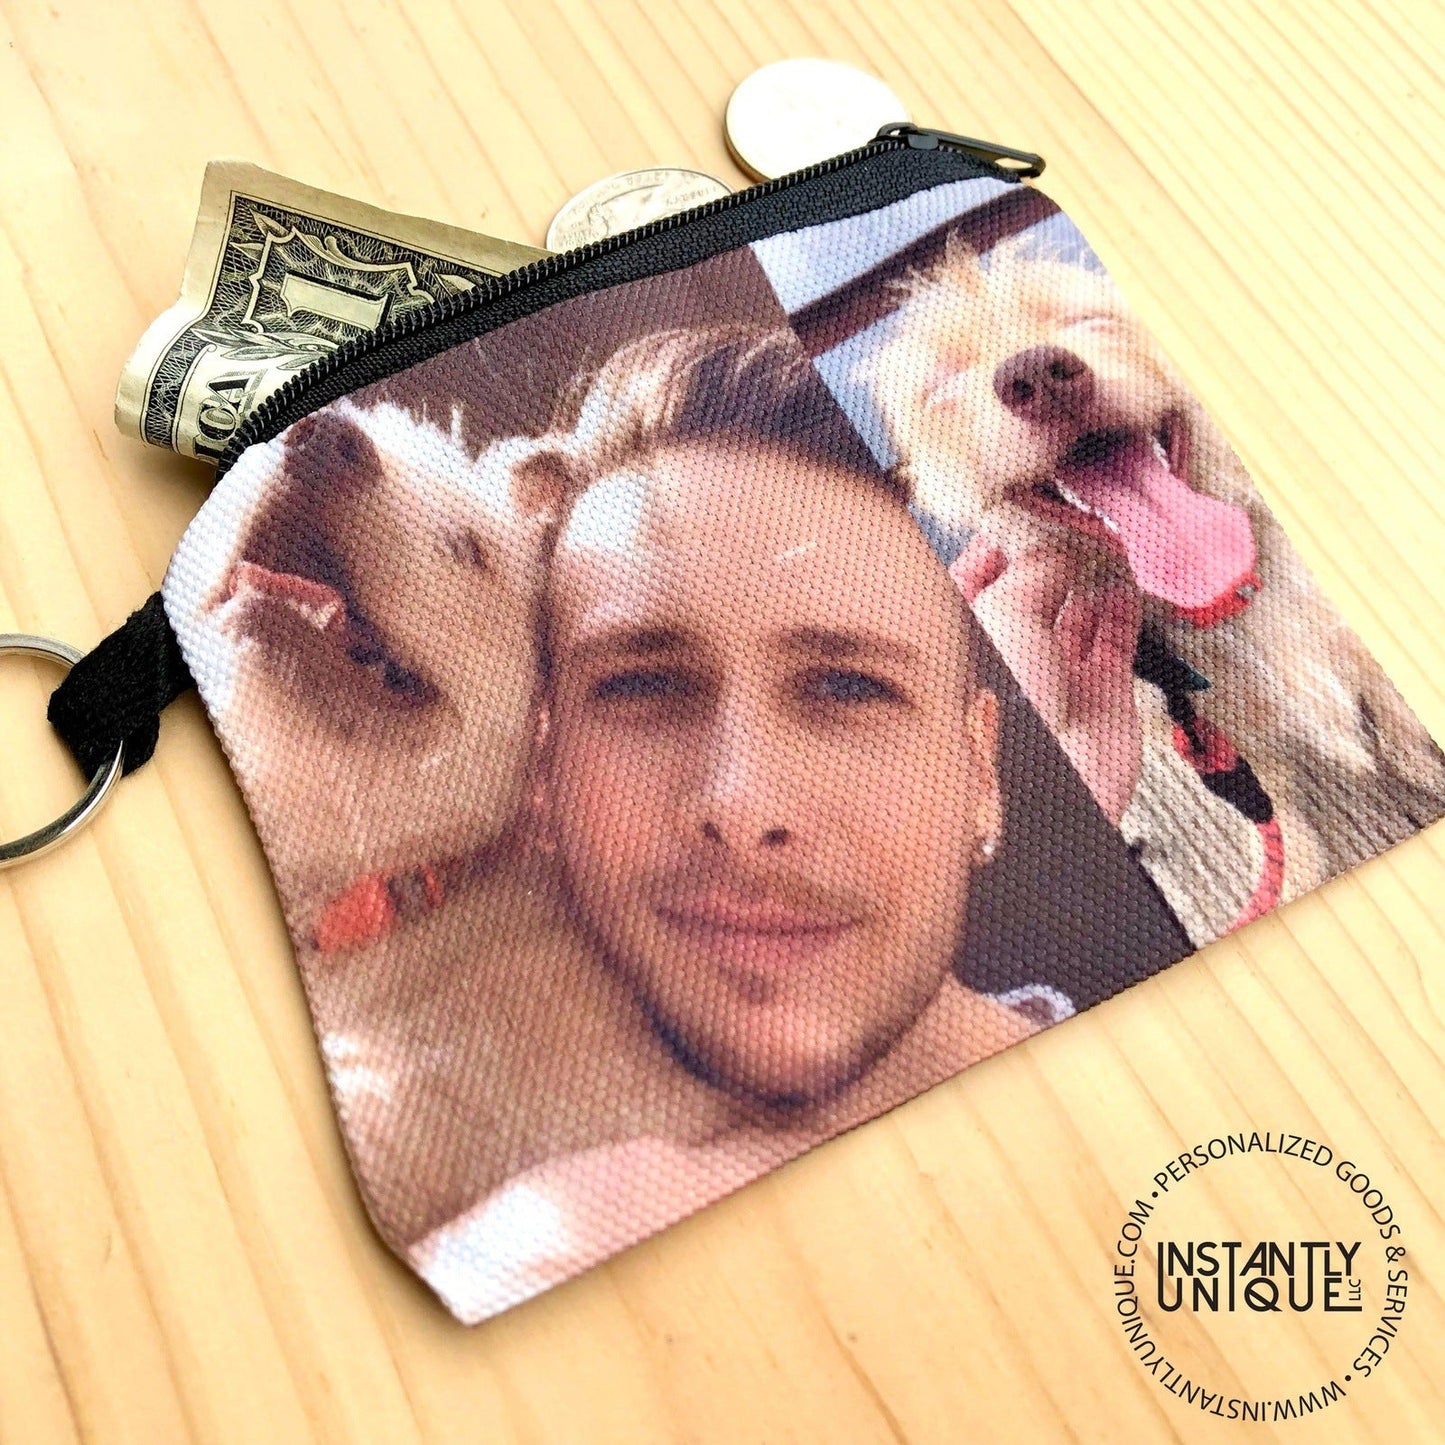 Custom Coin Purse with Pictures - Add your own photos